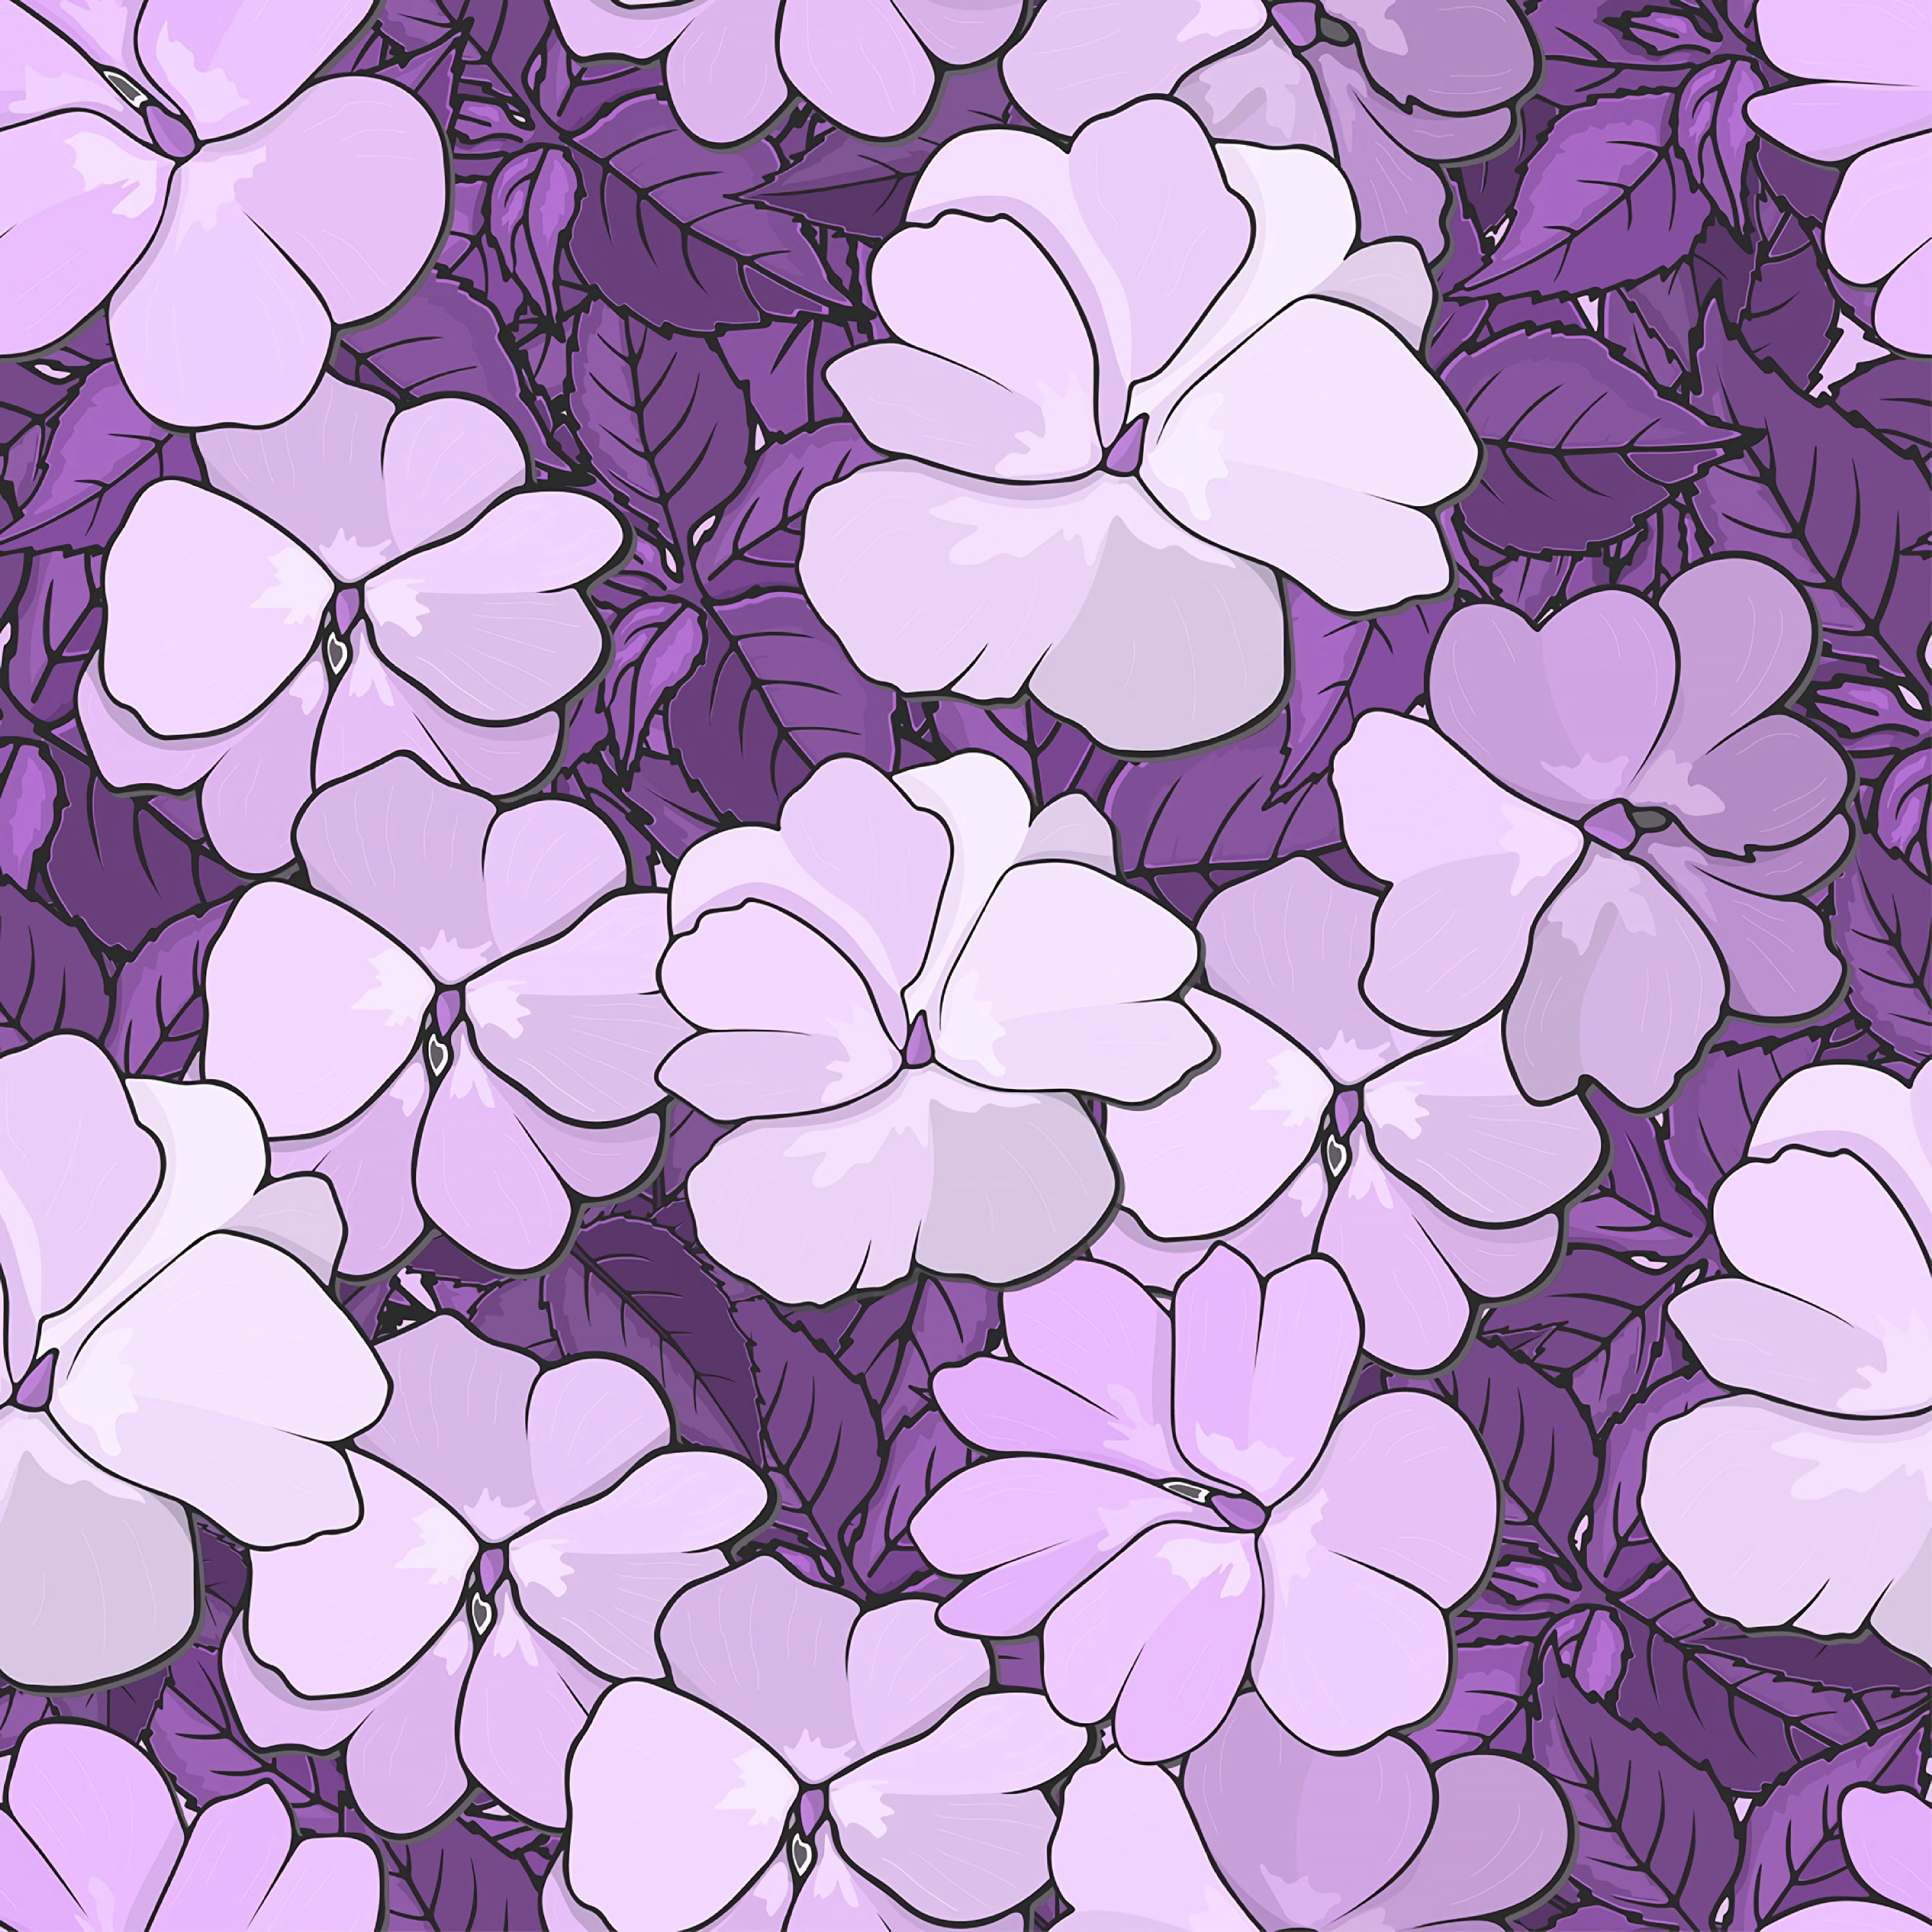 lilac, flowers, leaves, white, pattern, texture, textures, floral